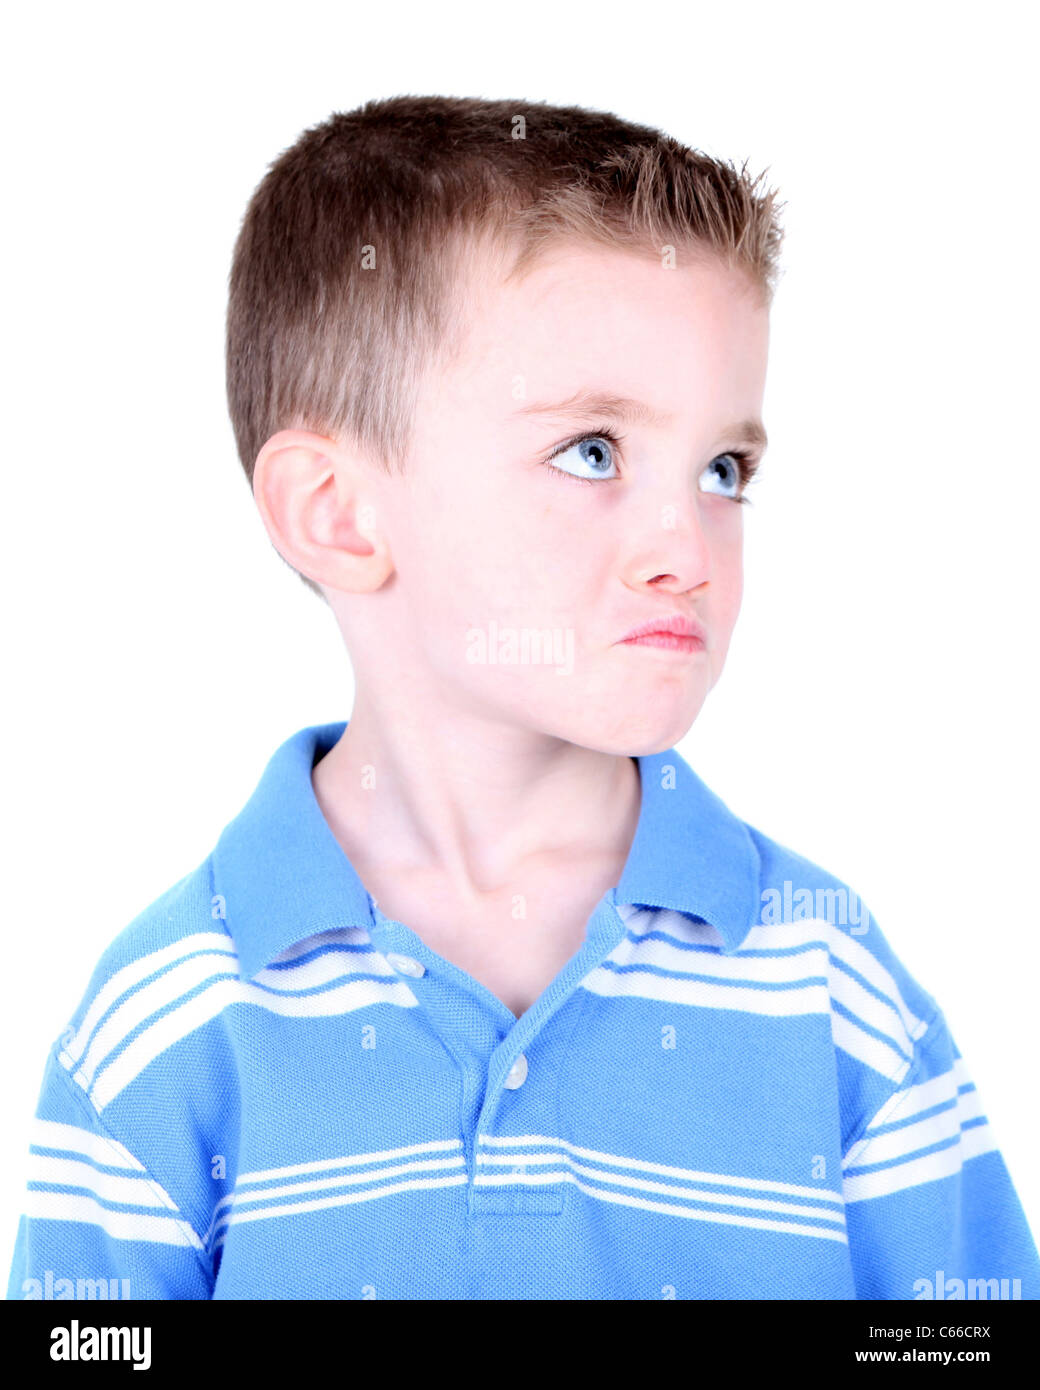 Young boy with pout Stock Photo - Alamy